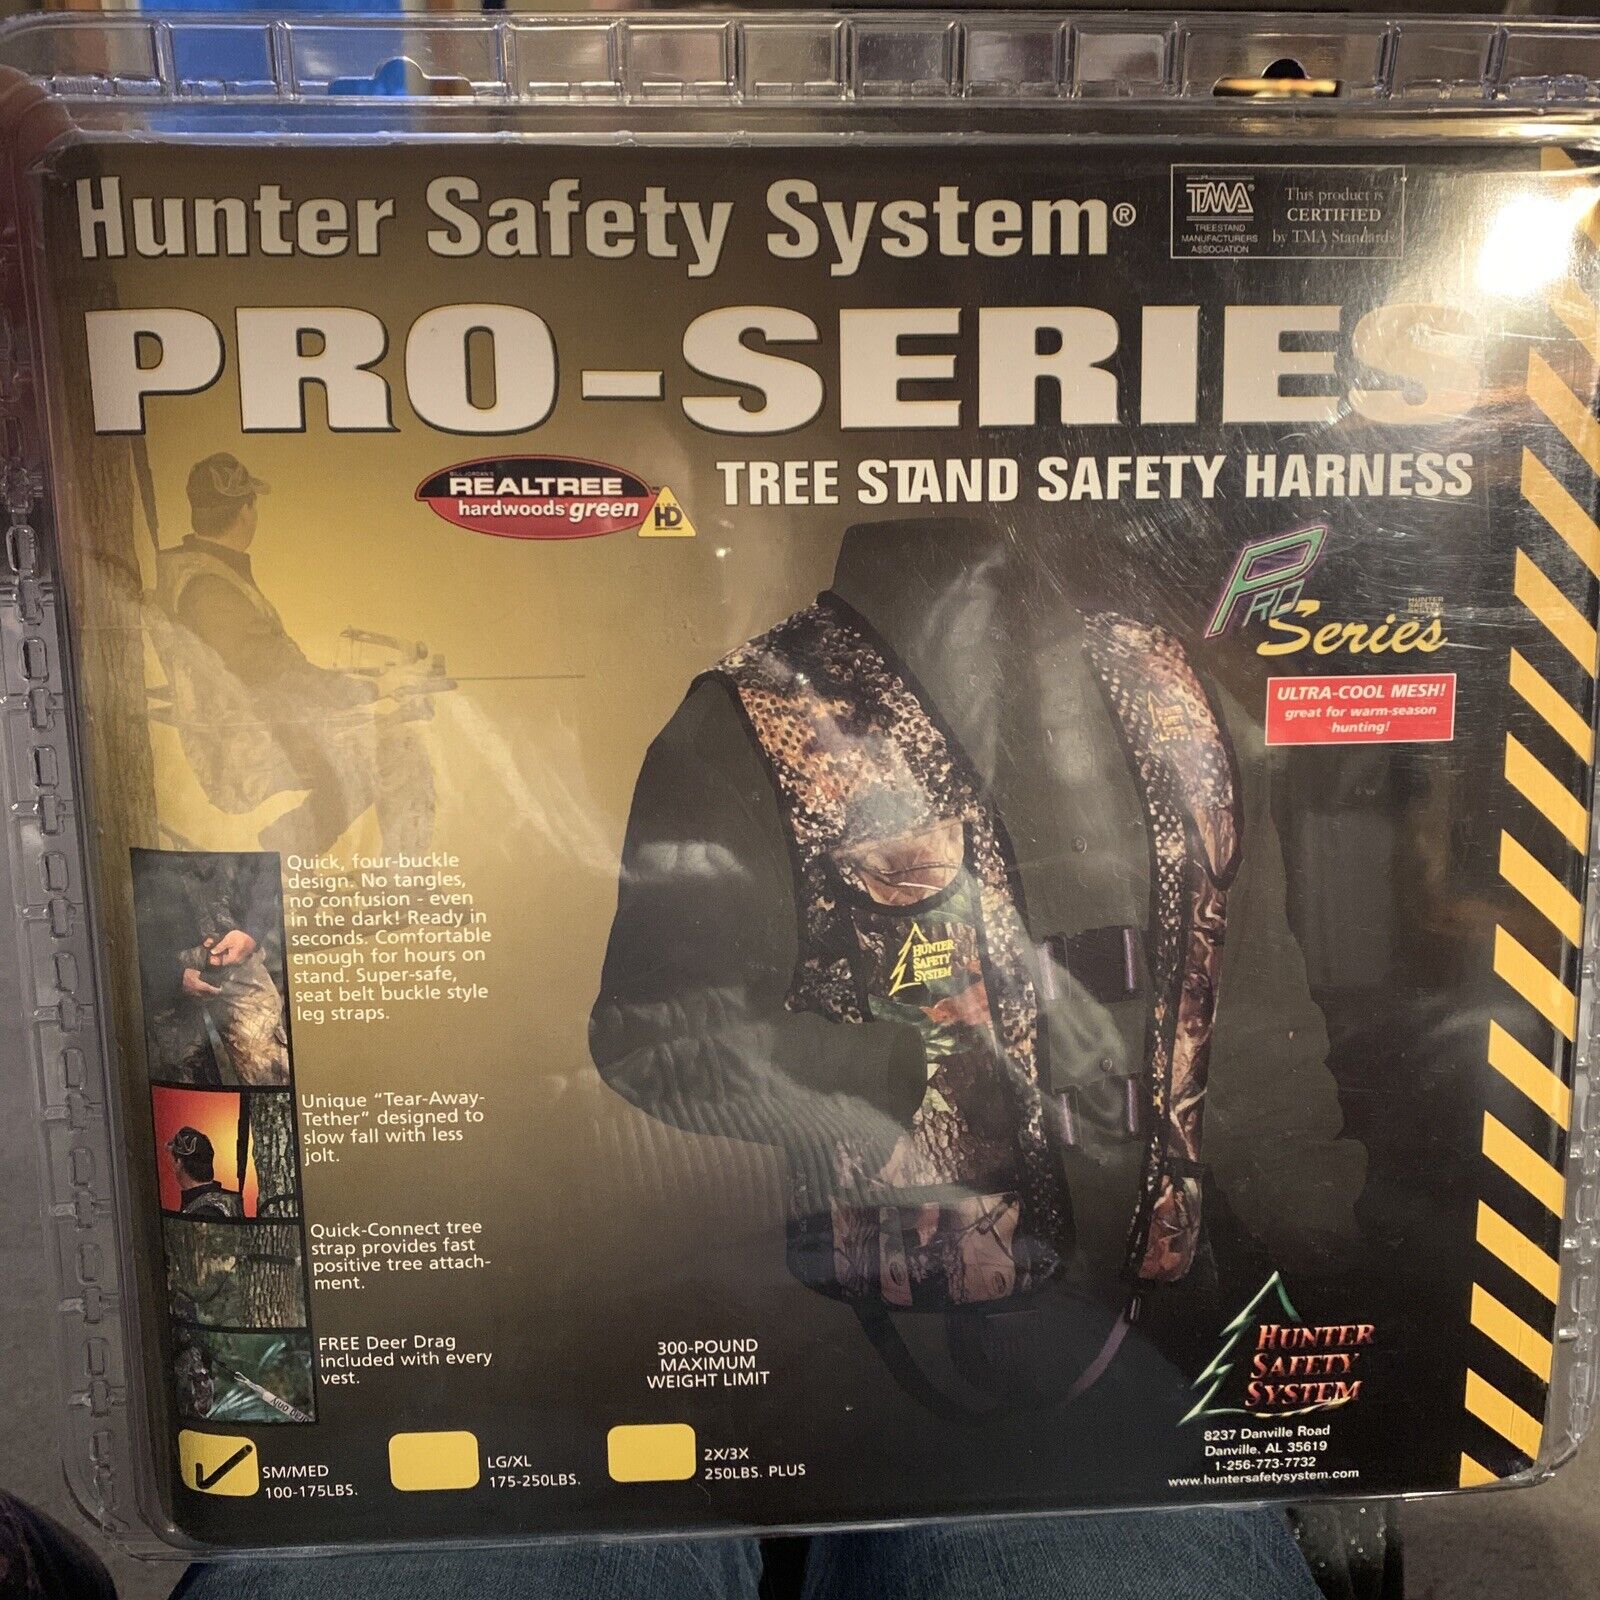 Hunter Safety Systems Pro Series Camo Hunting Bowhunter Tree Stand Harness, S/M